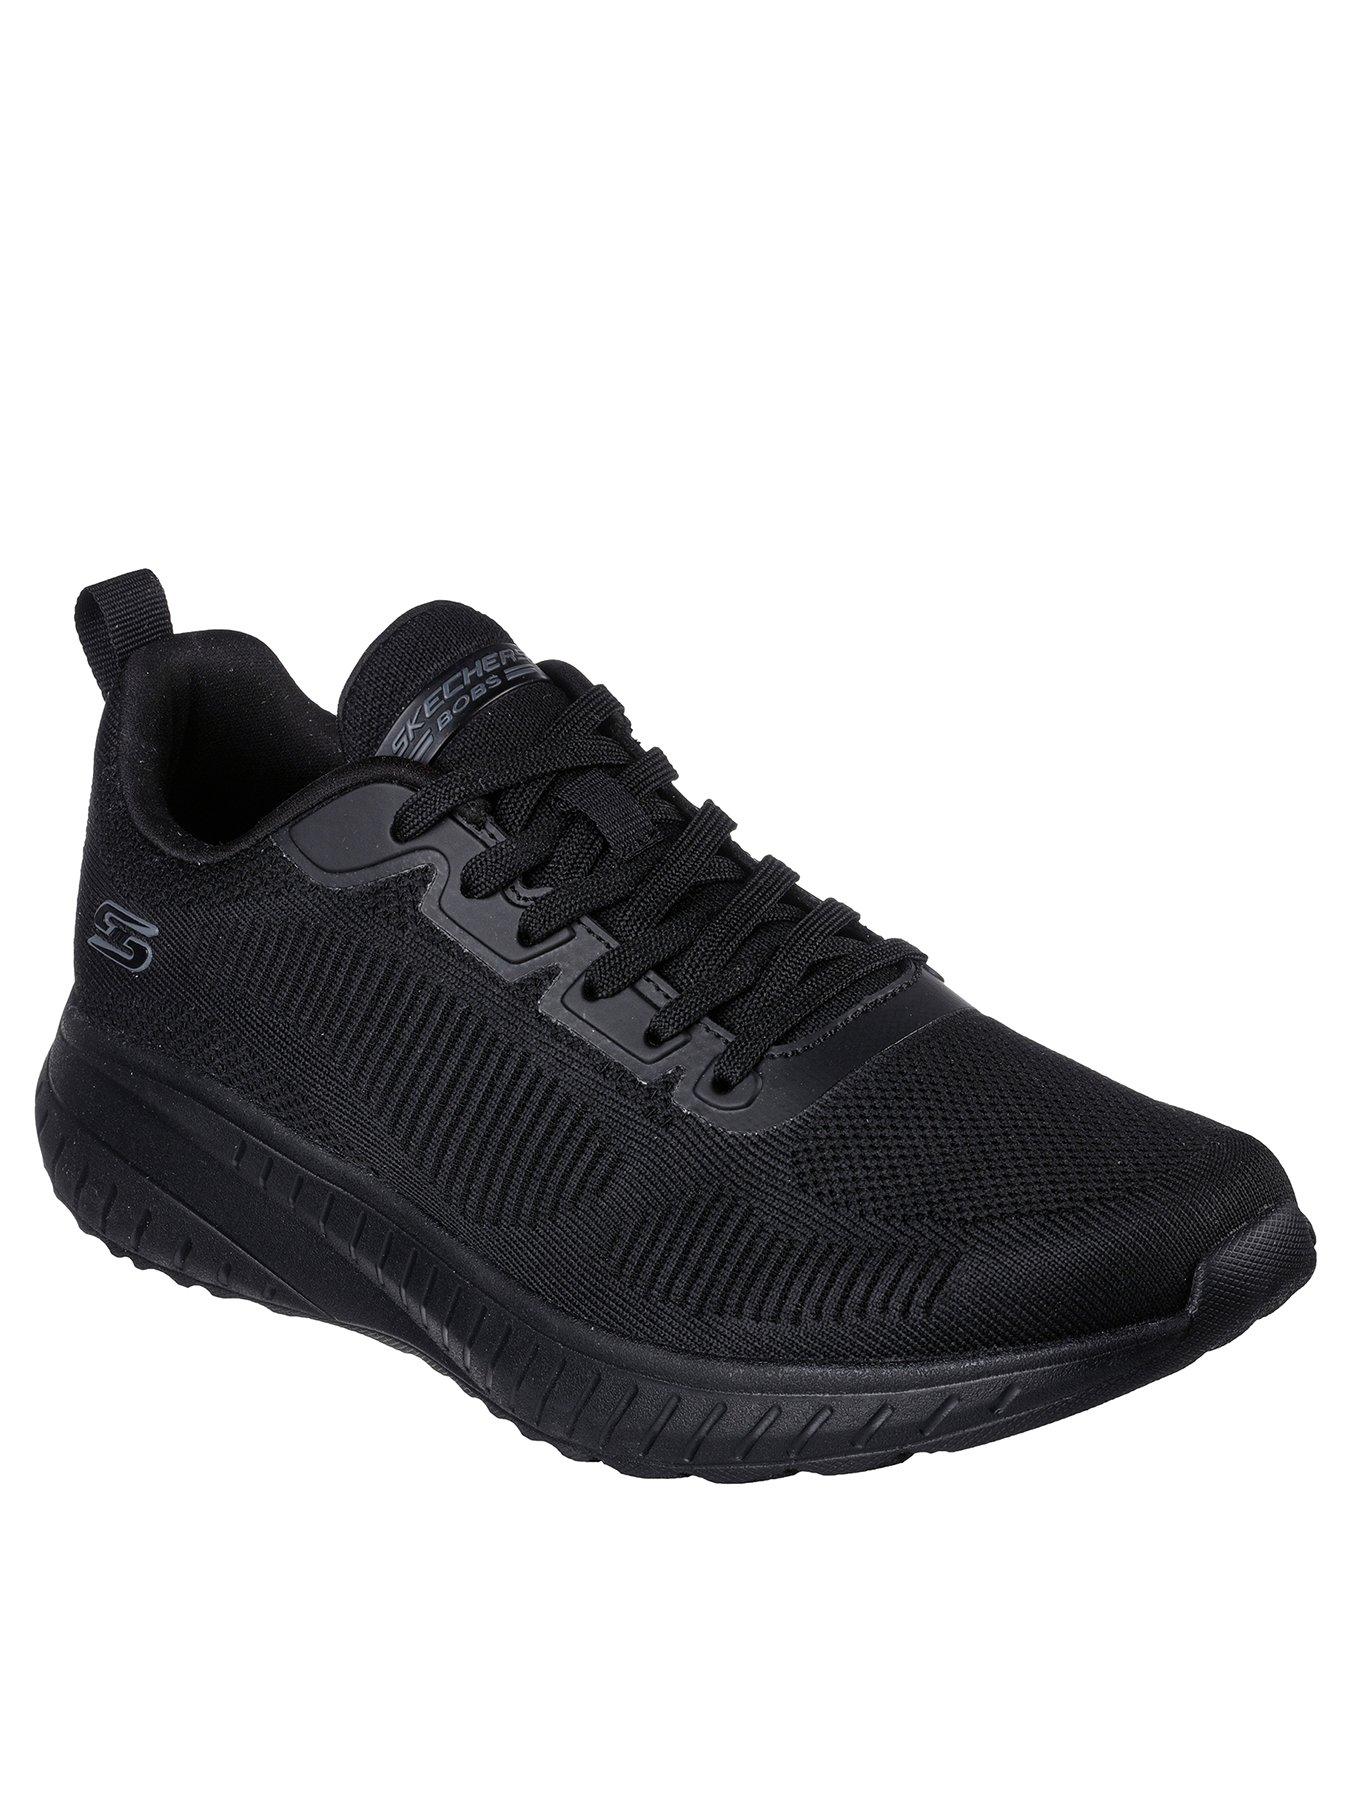 Skechers Bobs Squad Chaos Lace Up Trainers - Black | littlewoods.com